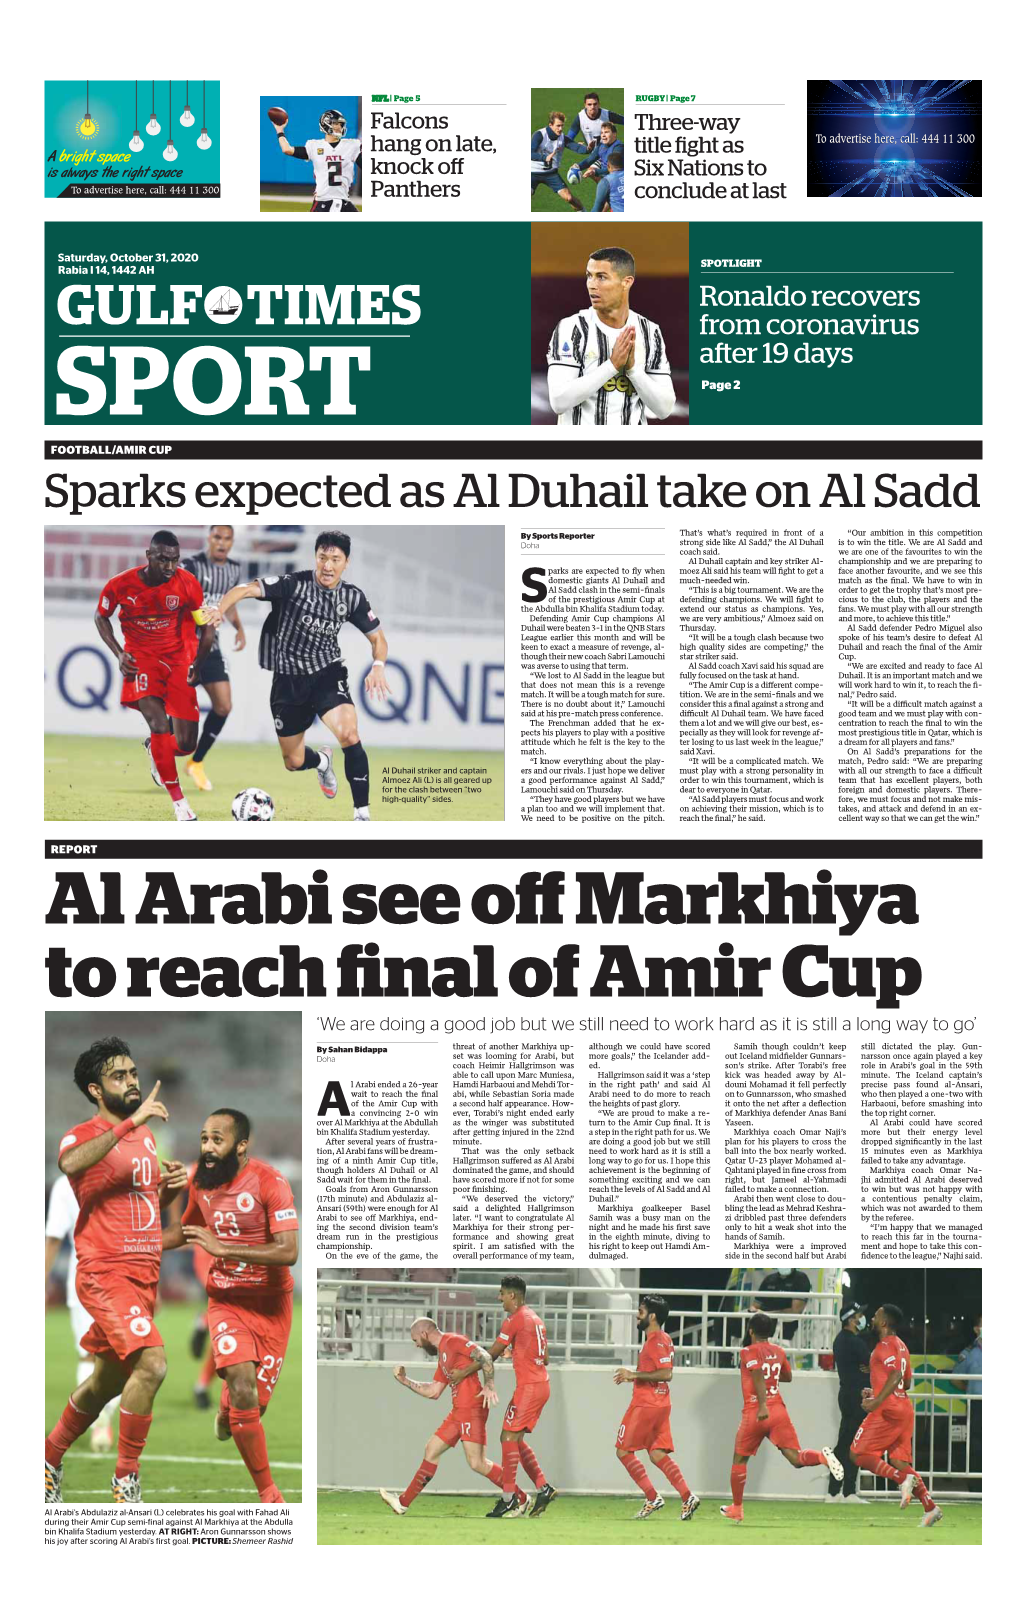 GULF TIMES from Coronavirus Aft Er 19 Days SPORT Page 2 FOOTBALL/AMIR CUP Sparks Expected As Al Duhail Take on Al Sadd